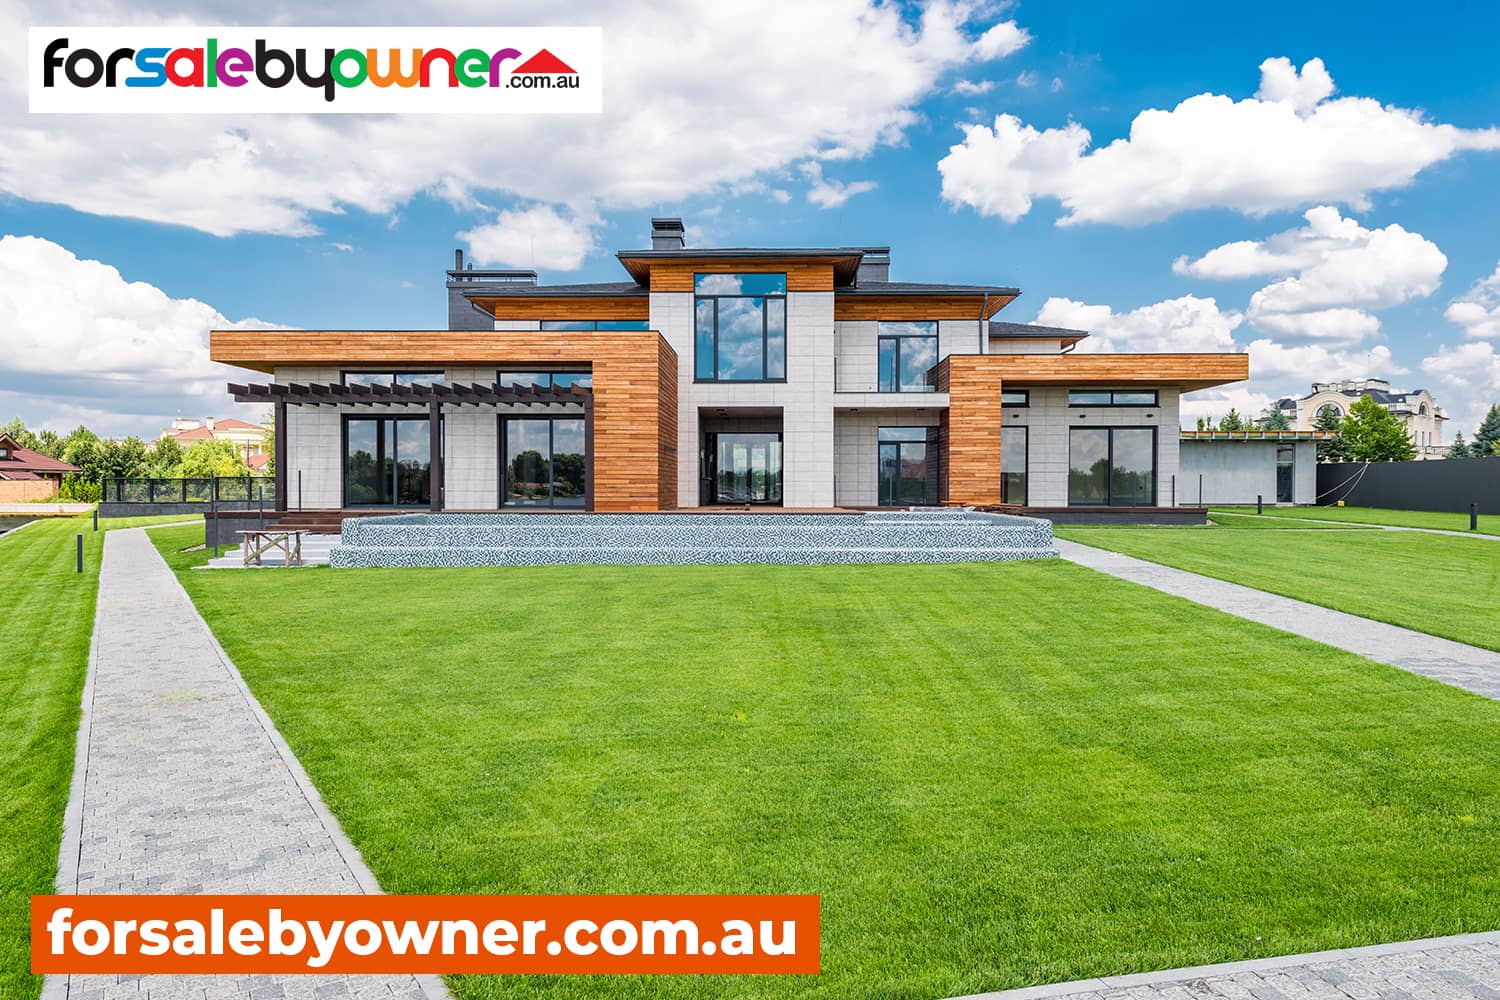 Sell House Privately On Realestate.com.au